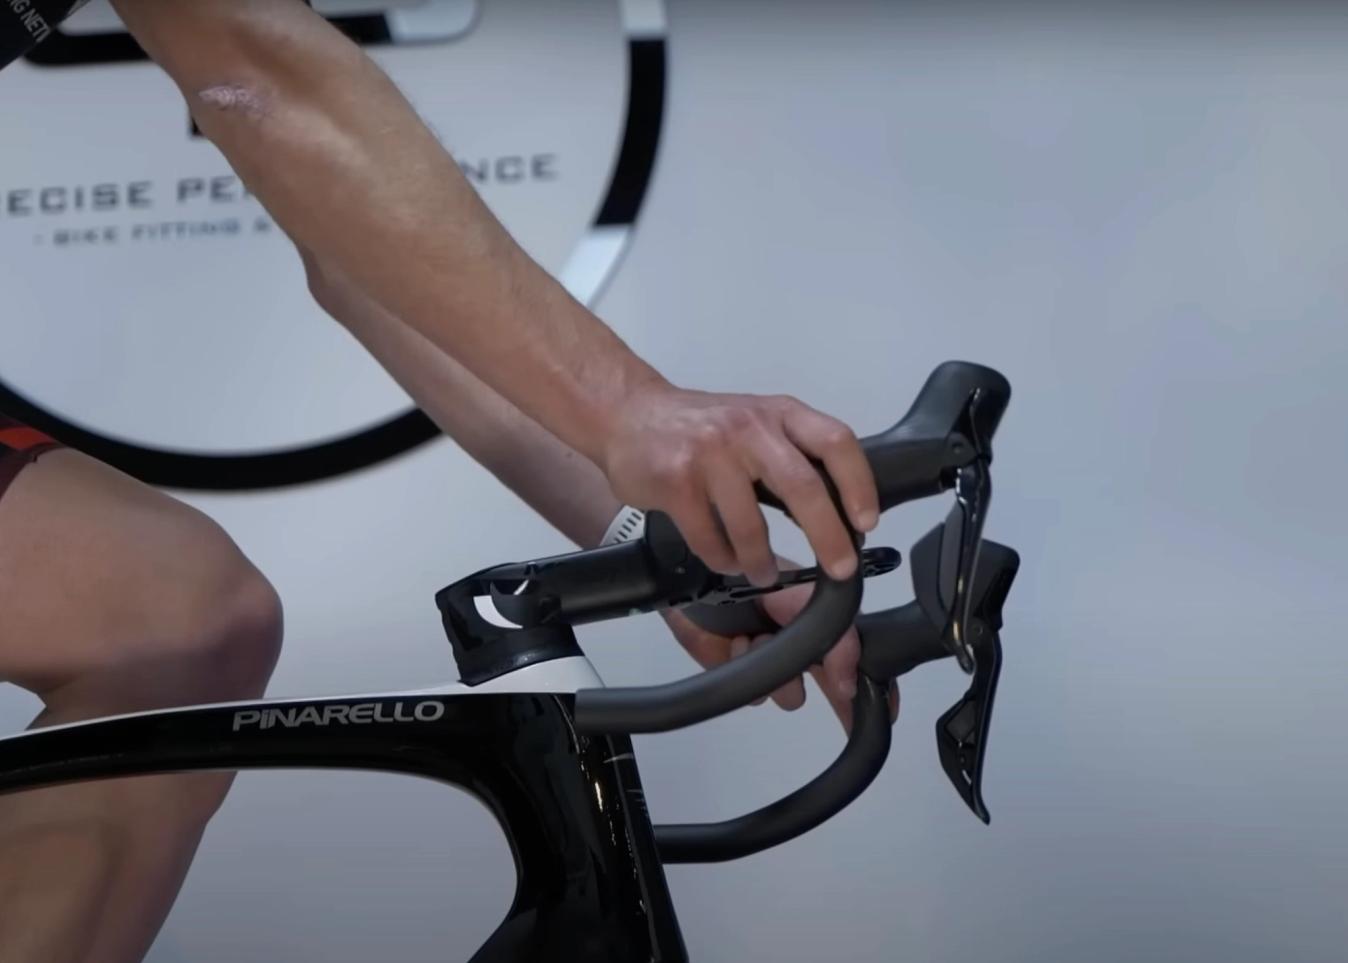 Resting your hands back on the bars could mean you need to adjust your reach.